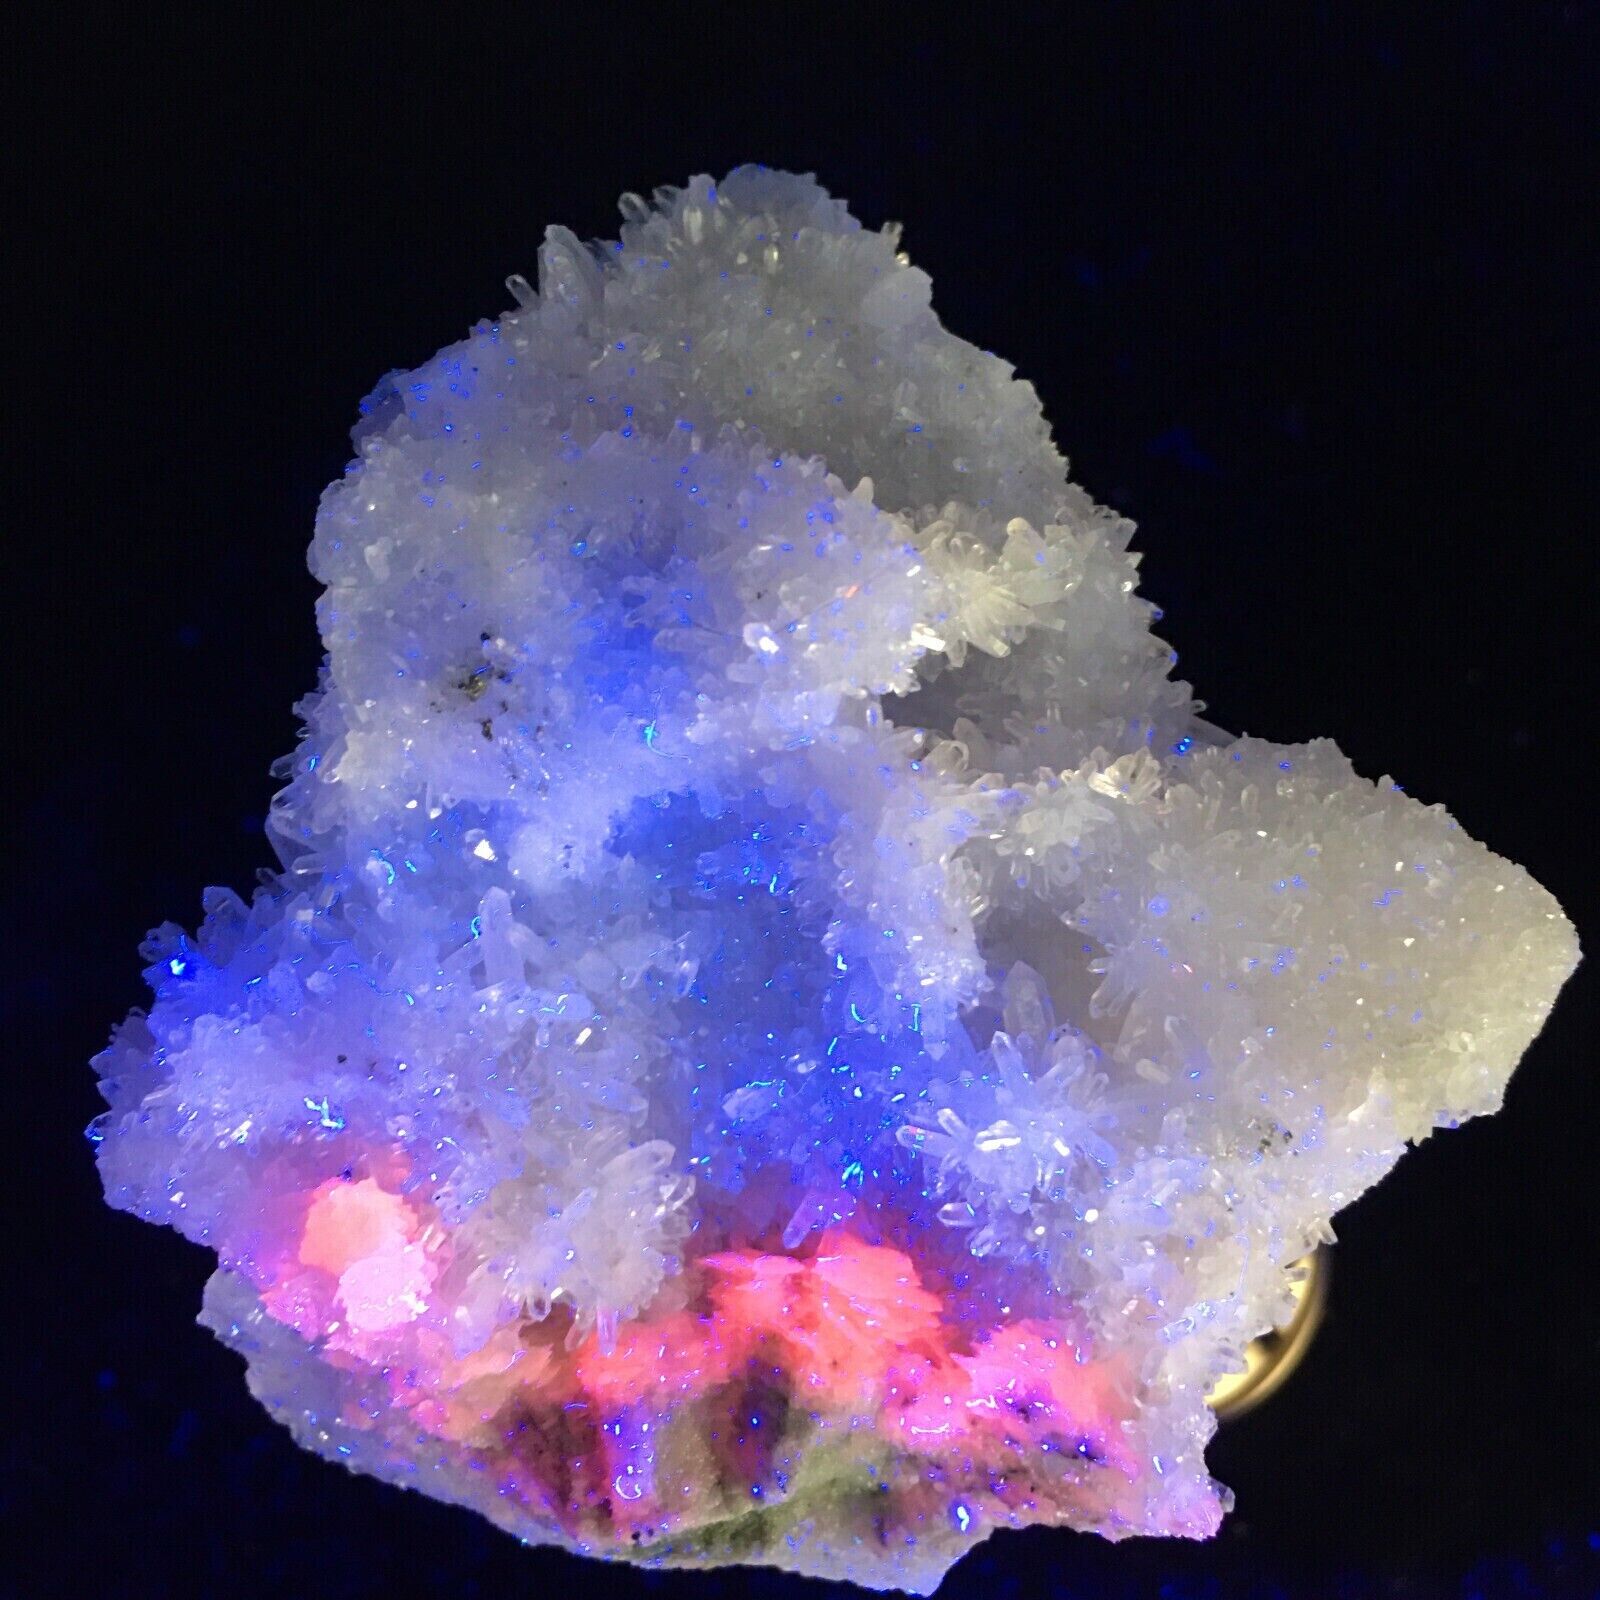 225g The Newly Discovered Chrysanthemum Crystals contain Flaky Calcite